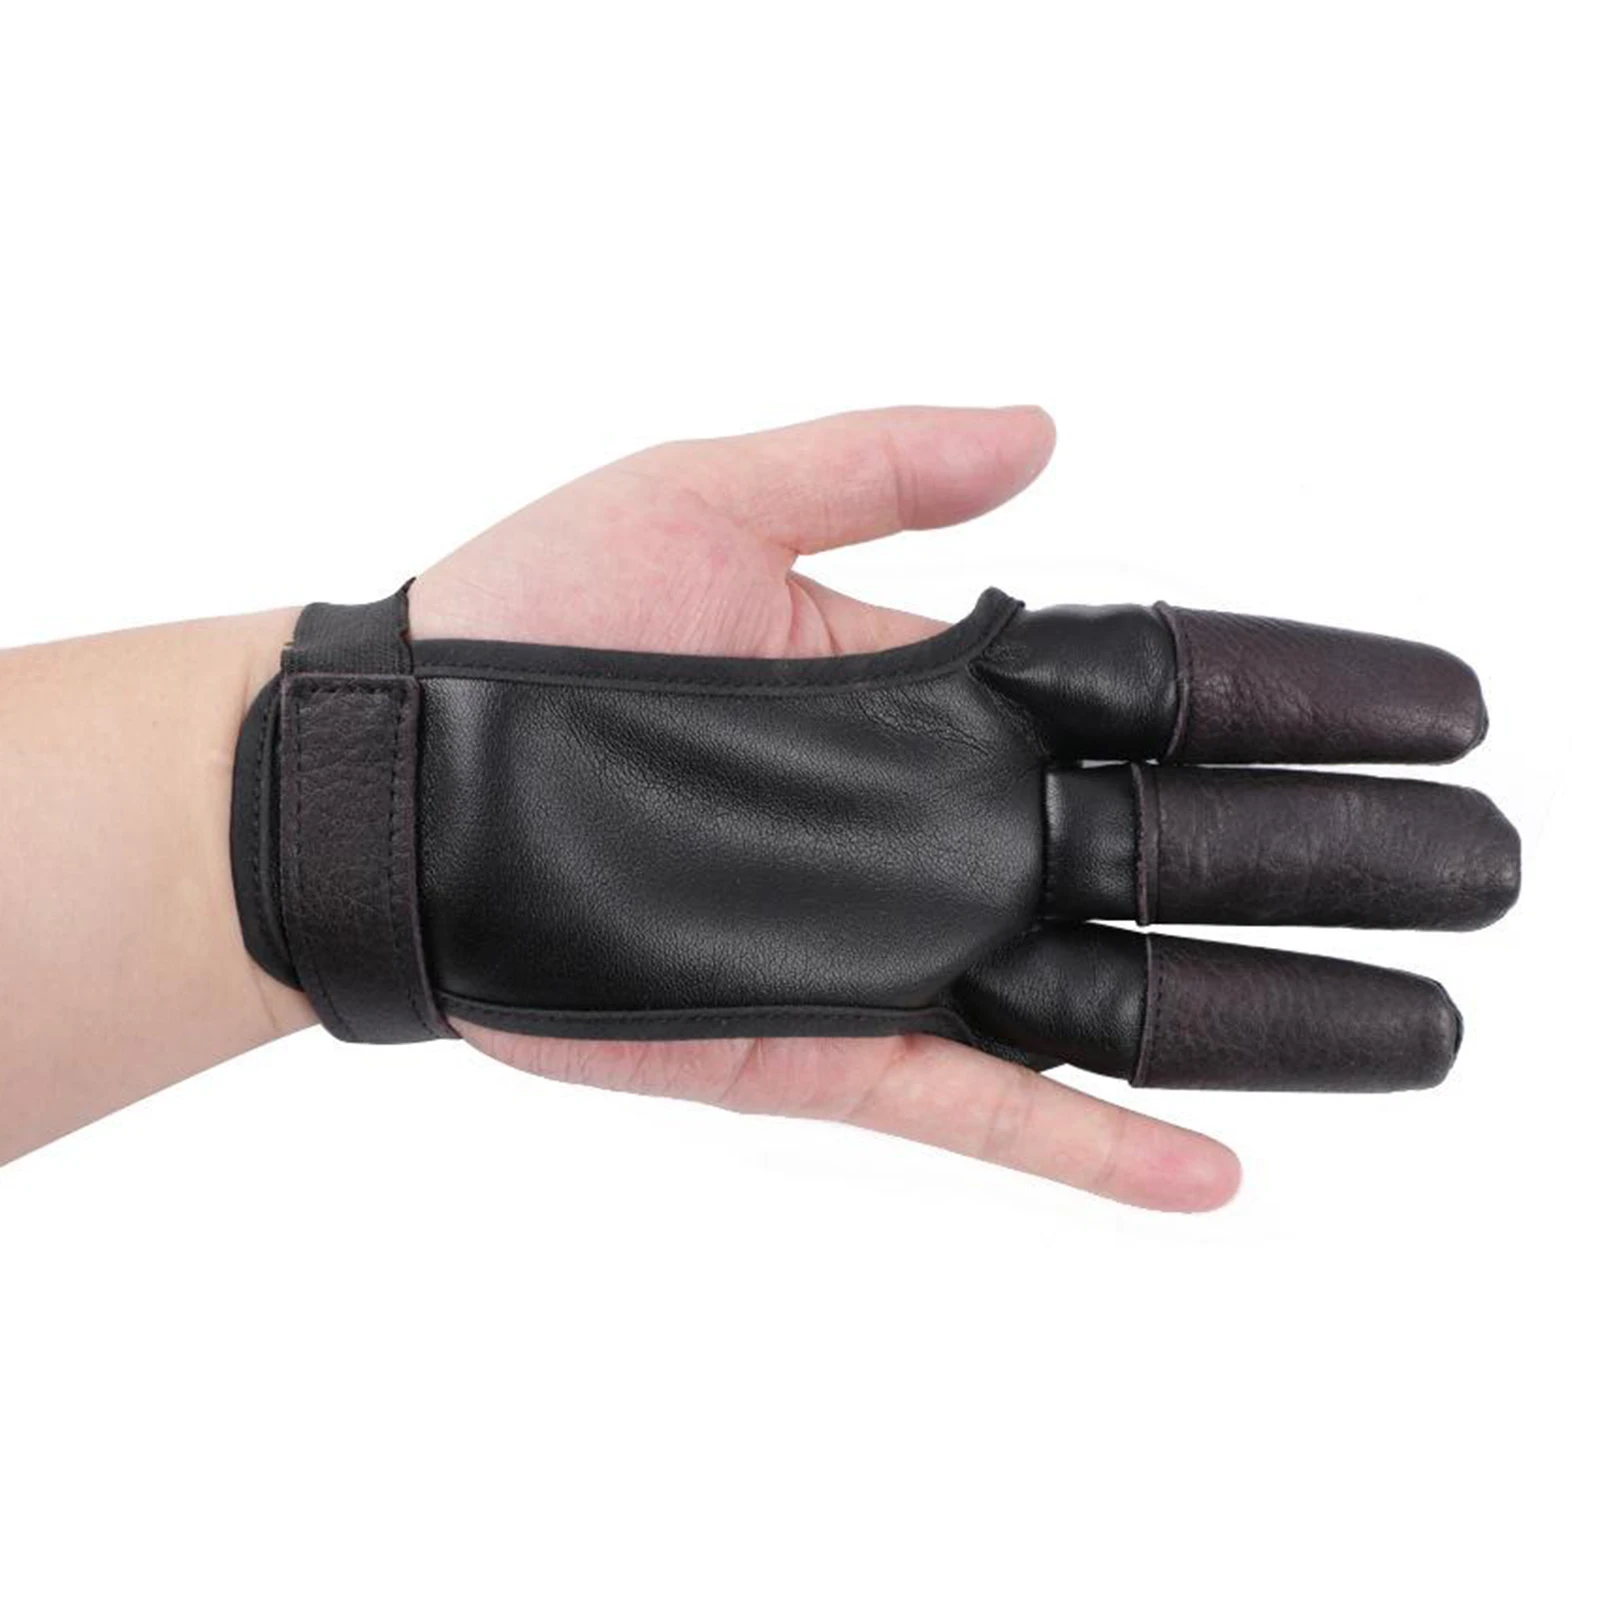 Archery Gloves Black PU Leather Three Finger Compound Bow Durable Cow Leather Finger Protective Glove for Hunting Shooting